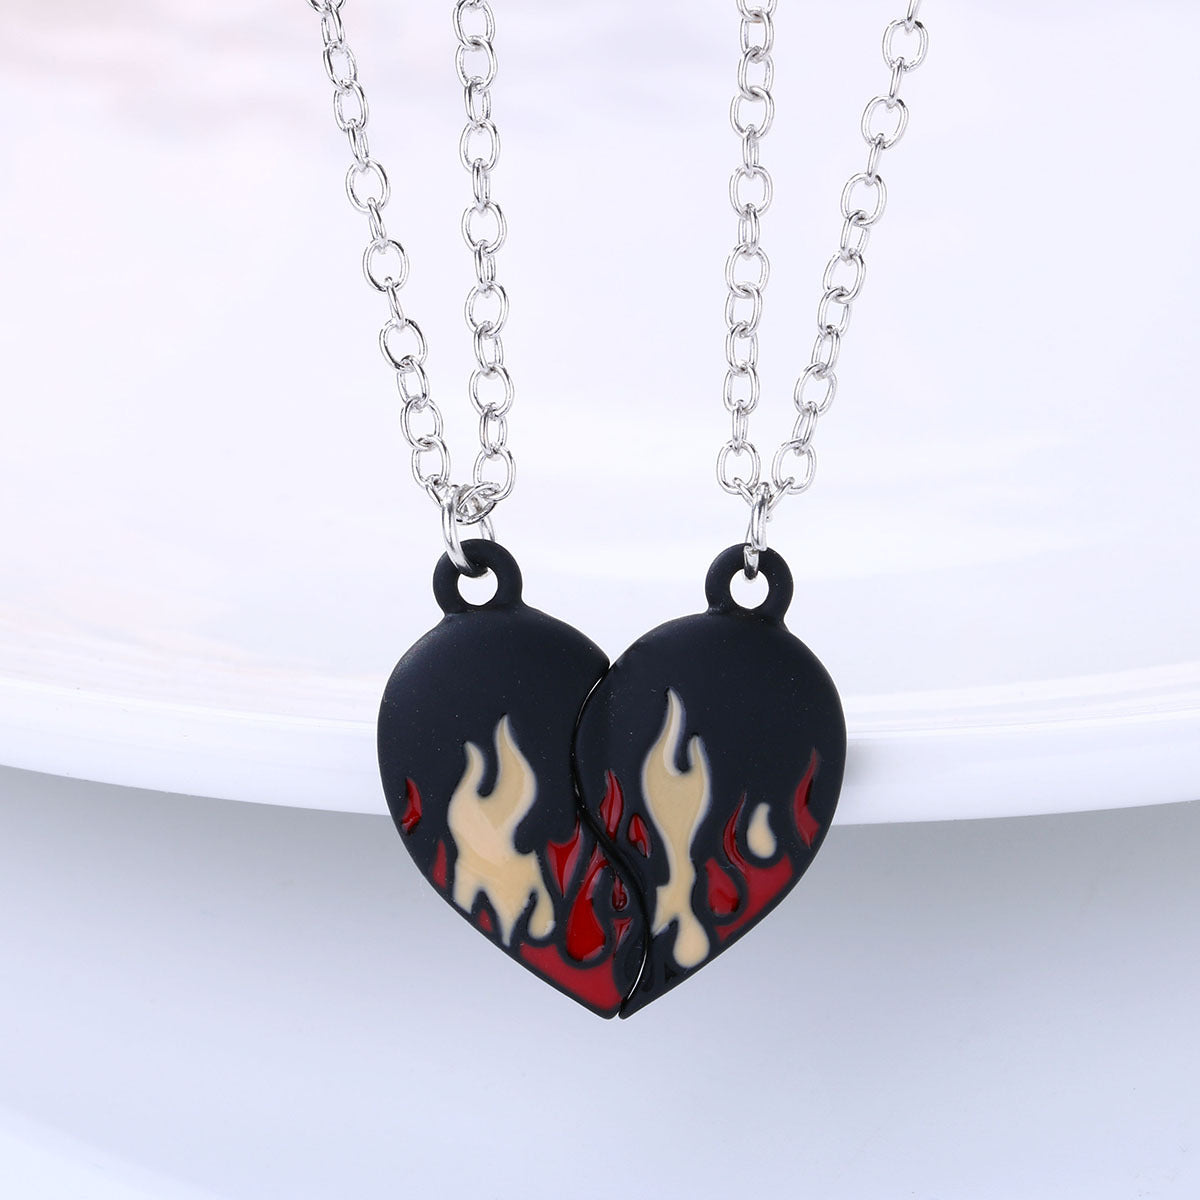 Engravable Connecting Half Hearts Couple Necklaces Gift Set